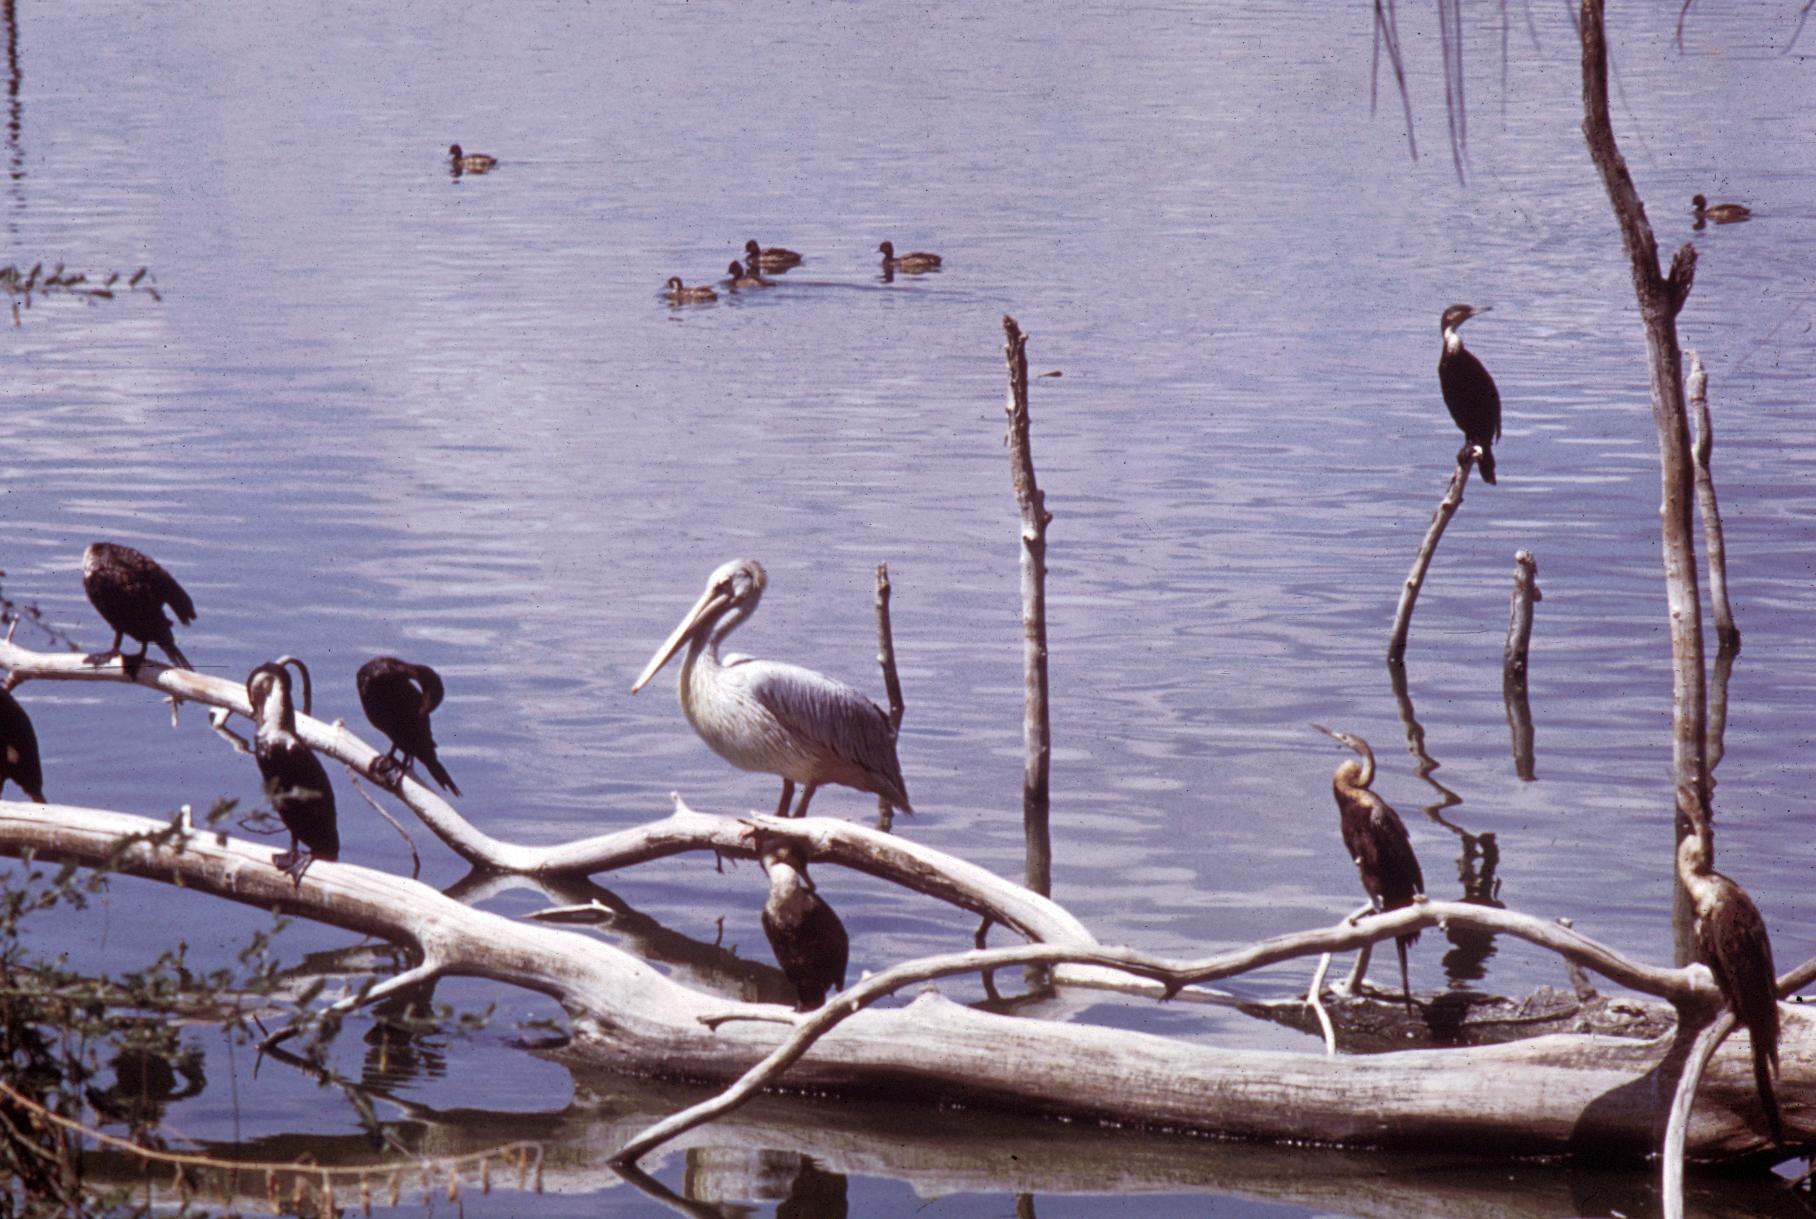 Pelicans, Anhingas, and Cormorants